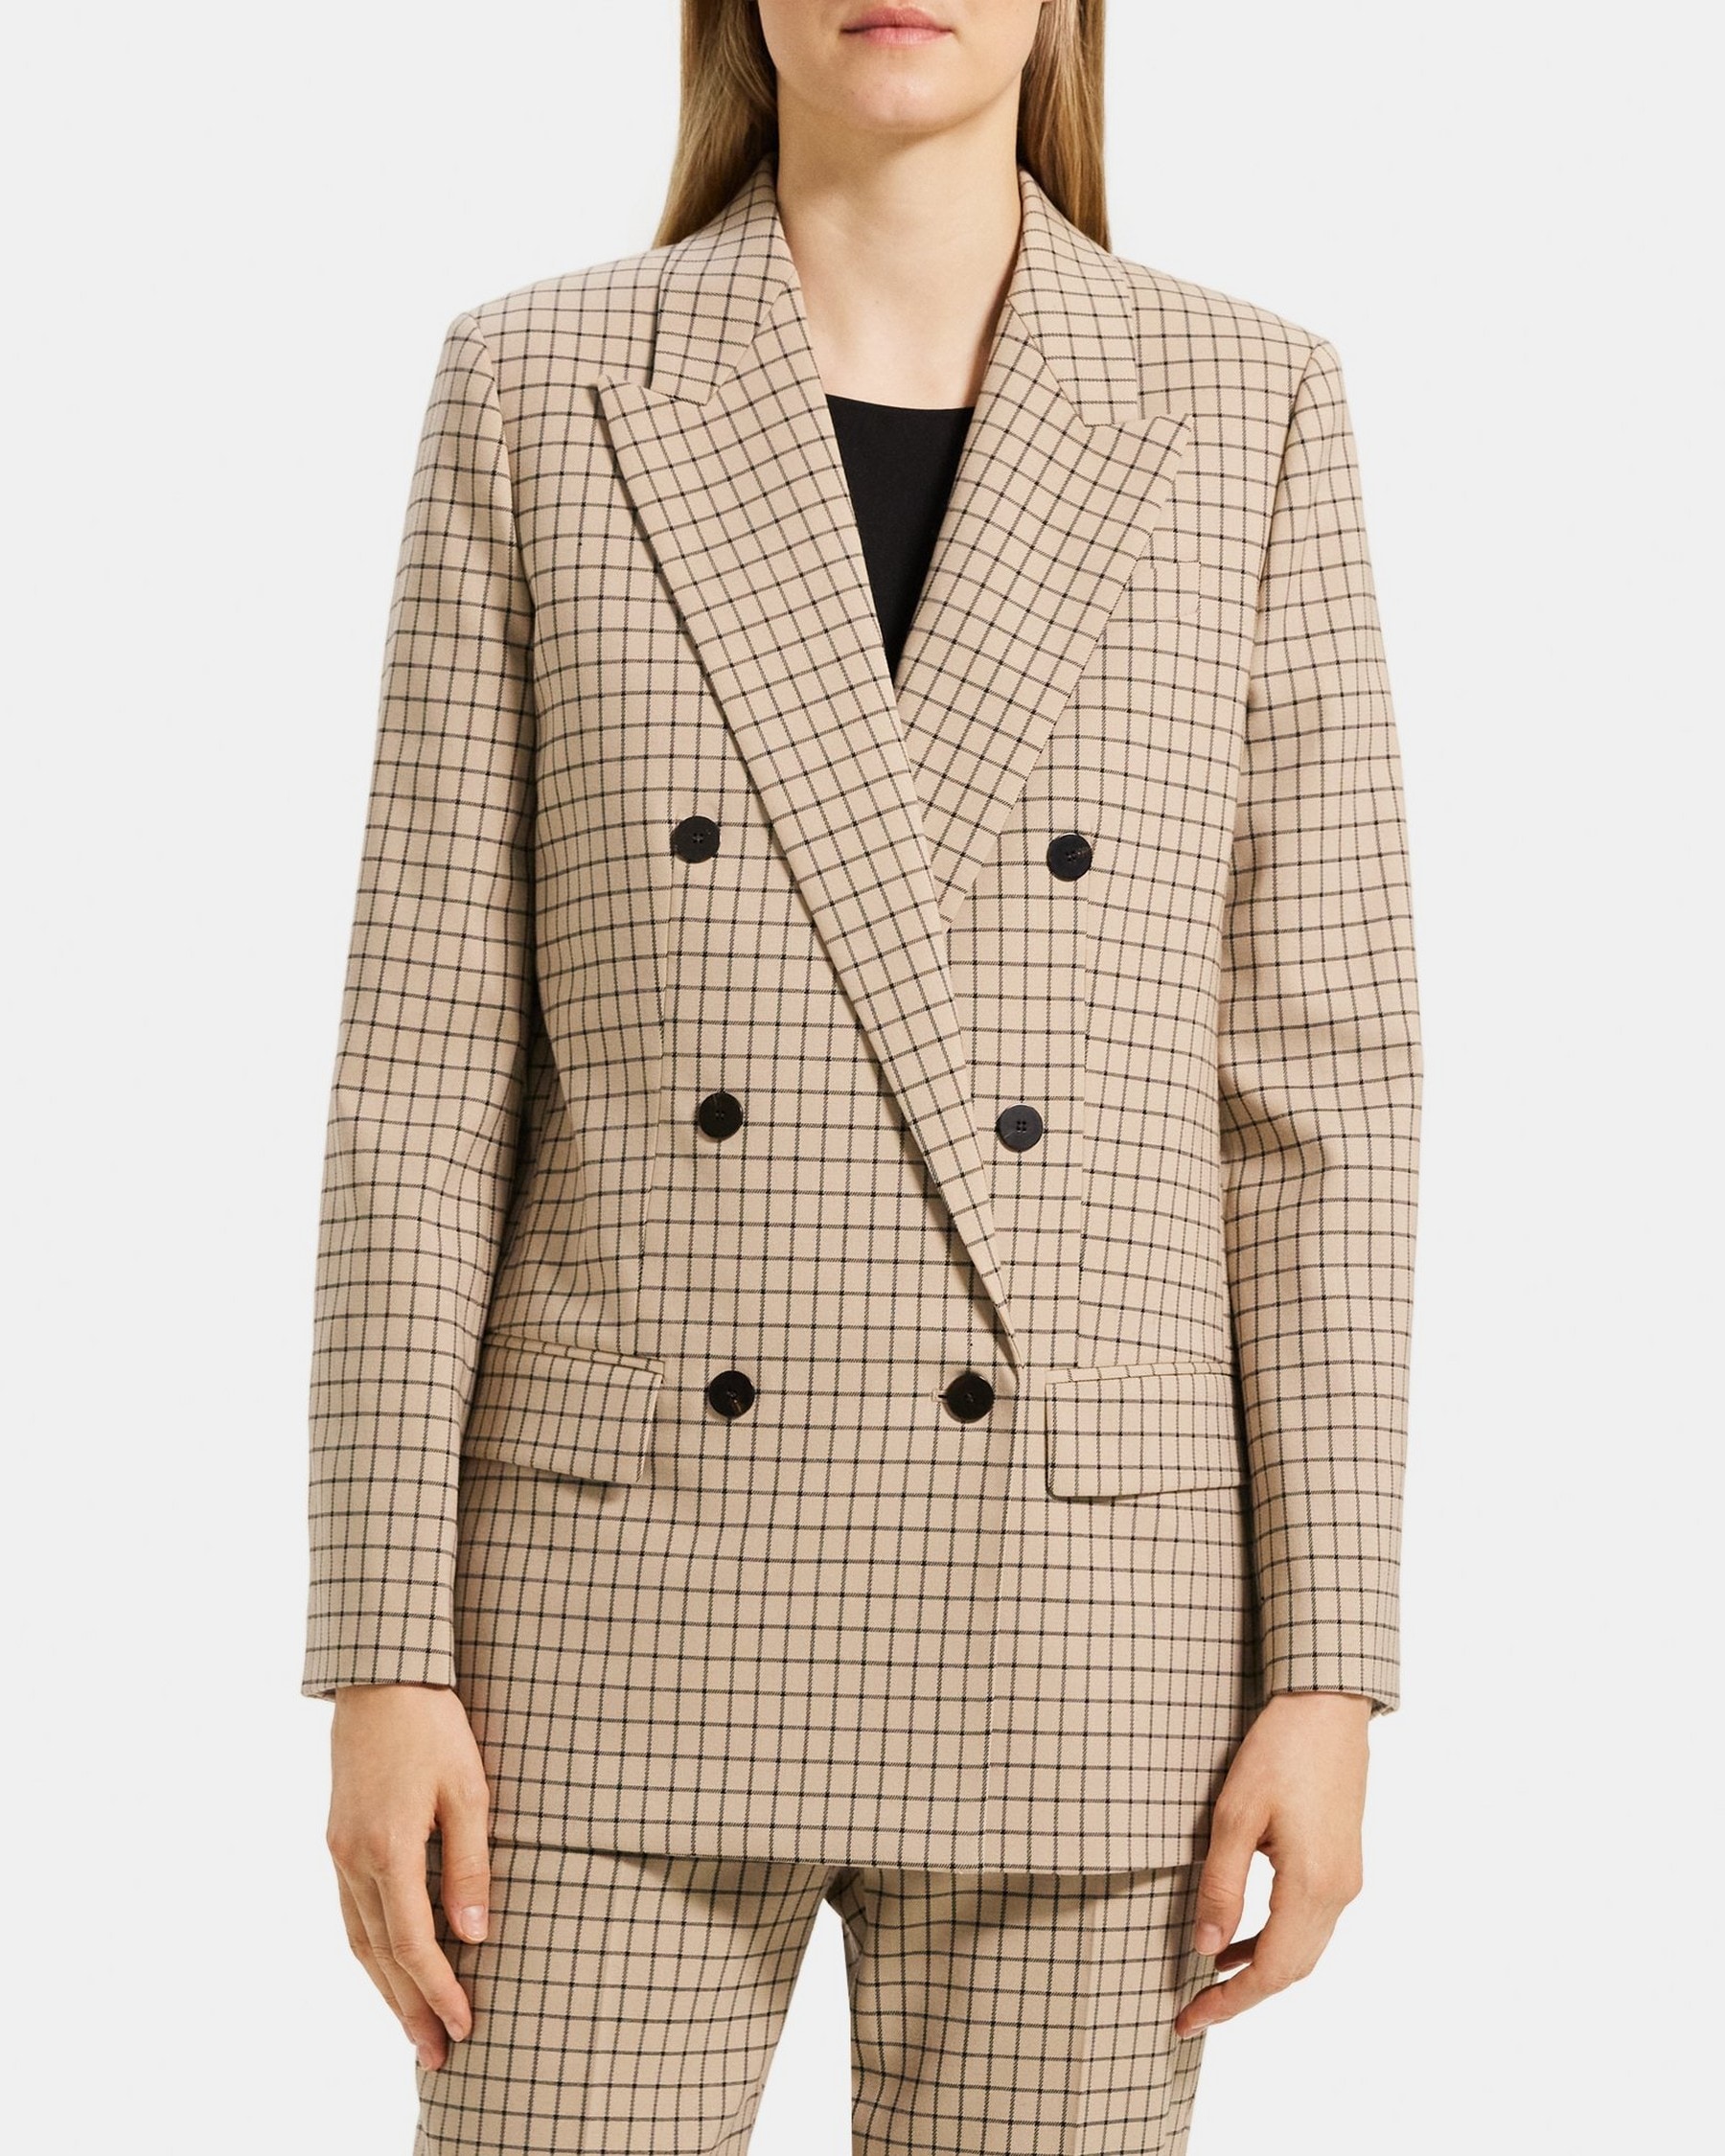 Theory Double-Breasted Jacket in Stretch Wool Blend